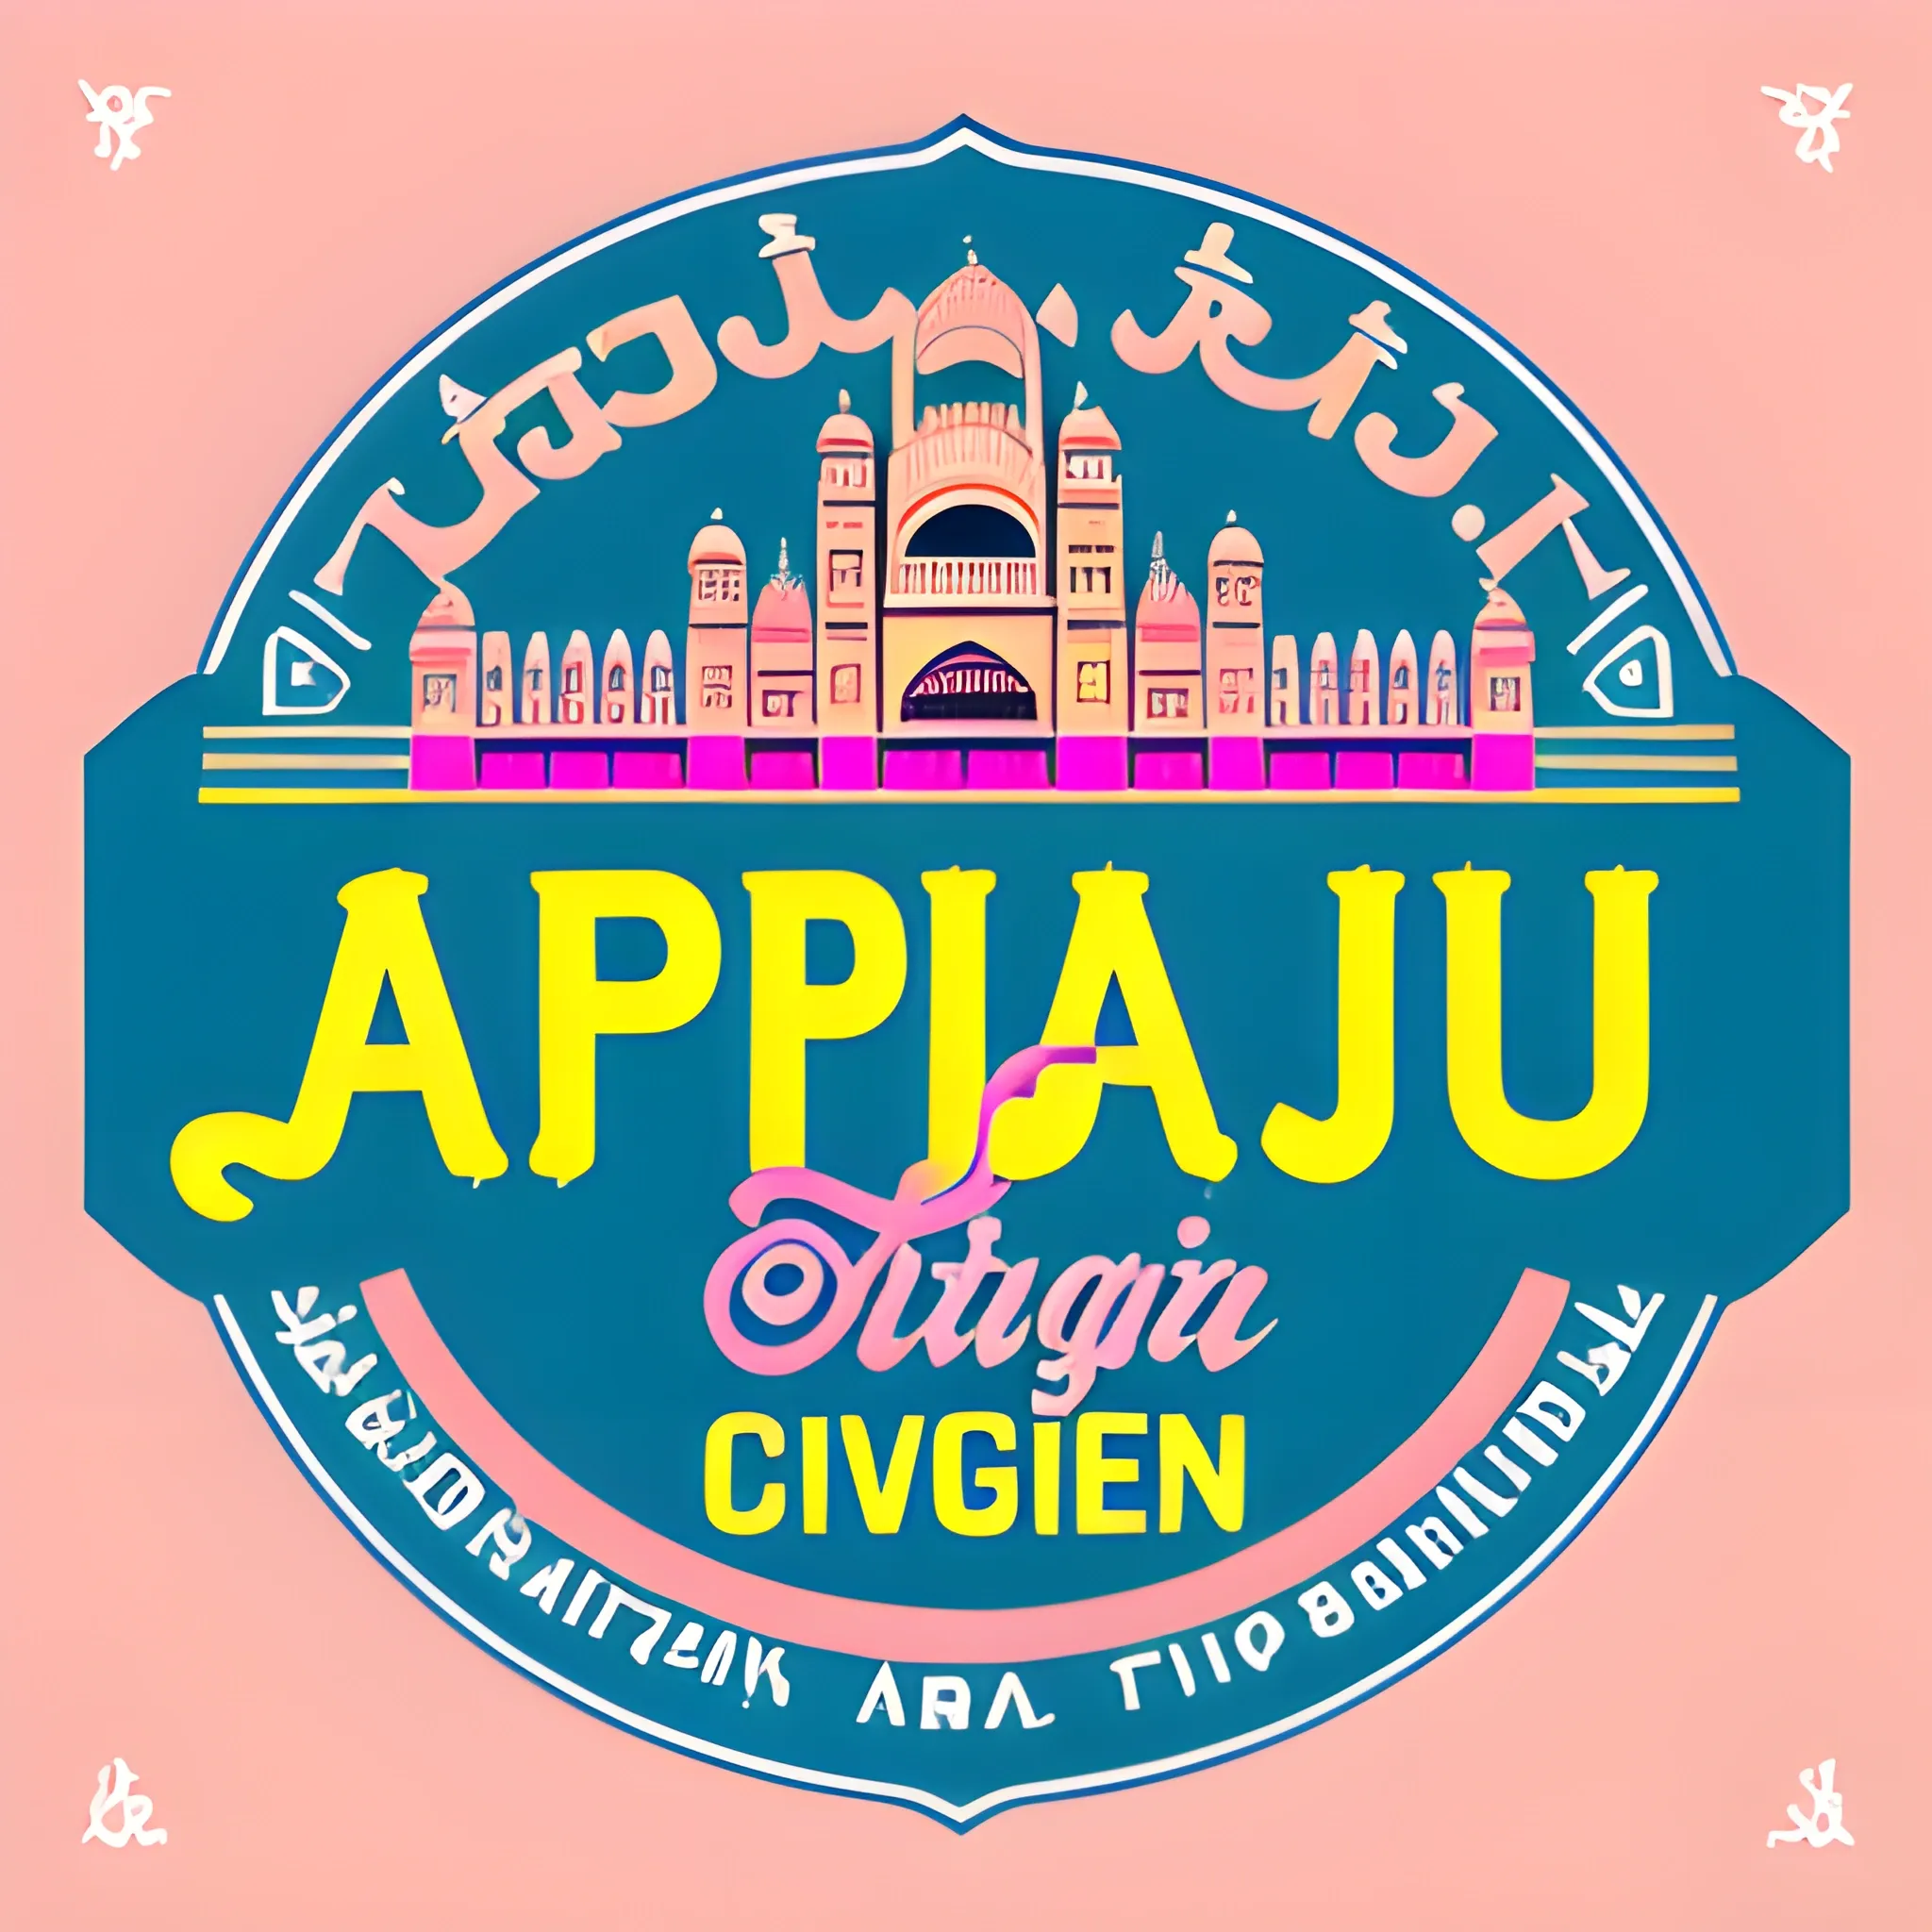 Jaipur slogan, pink city OF rajasthan and other buildings vintage, vector, t-shirt design, bright background